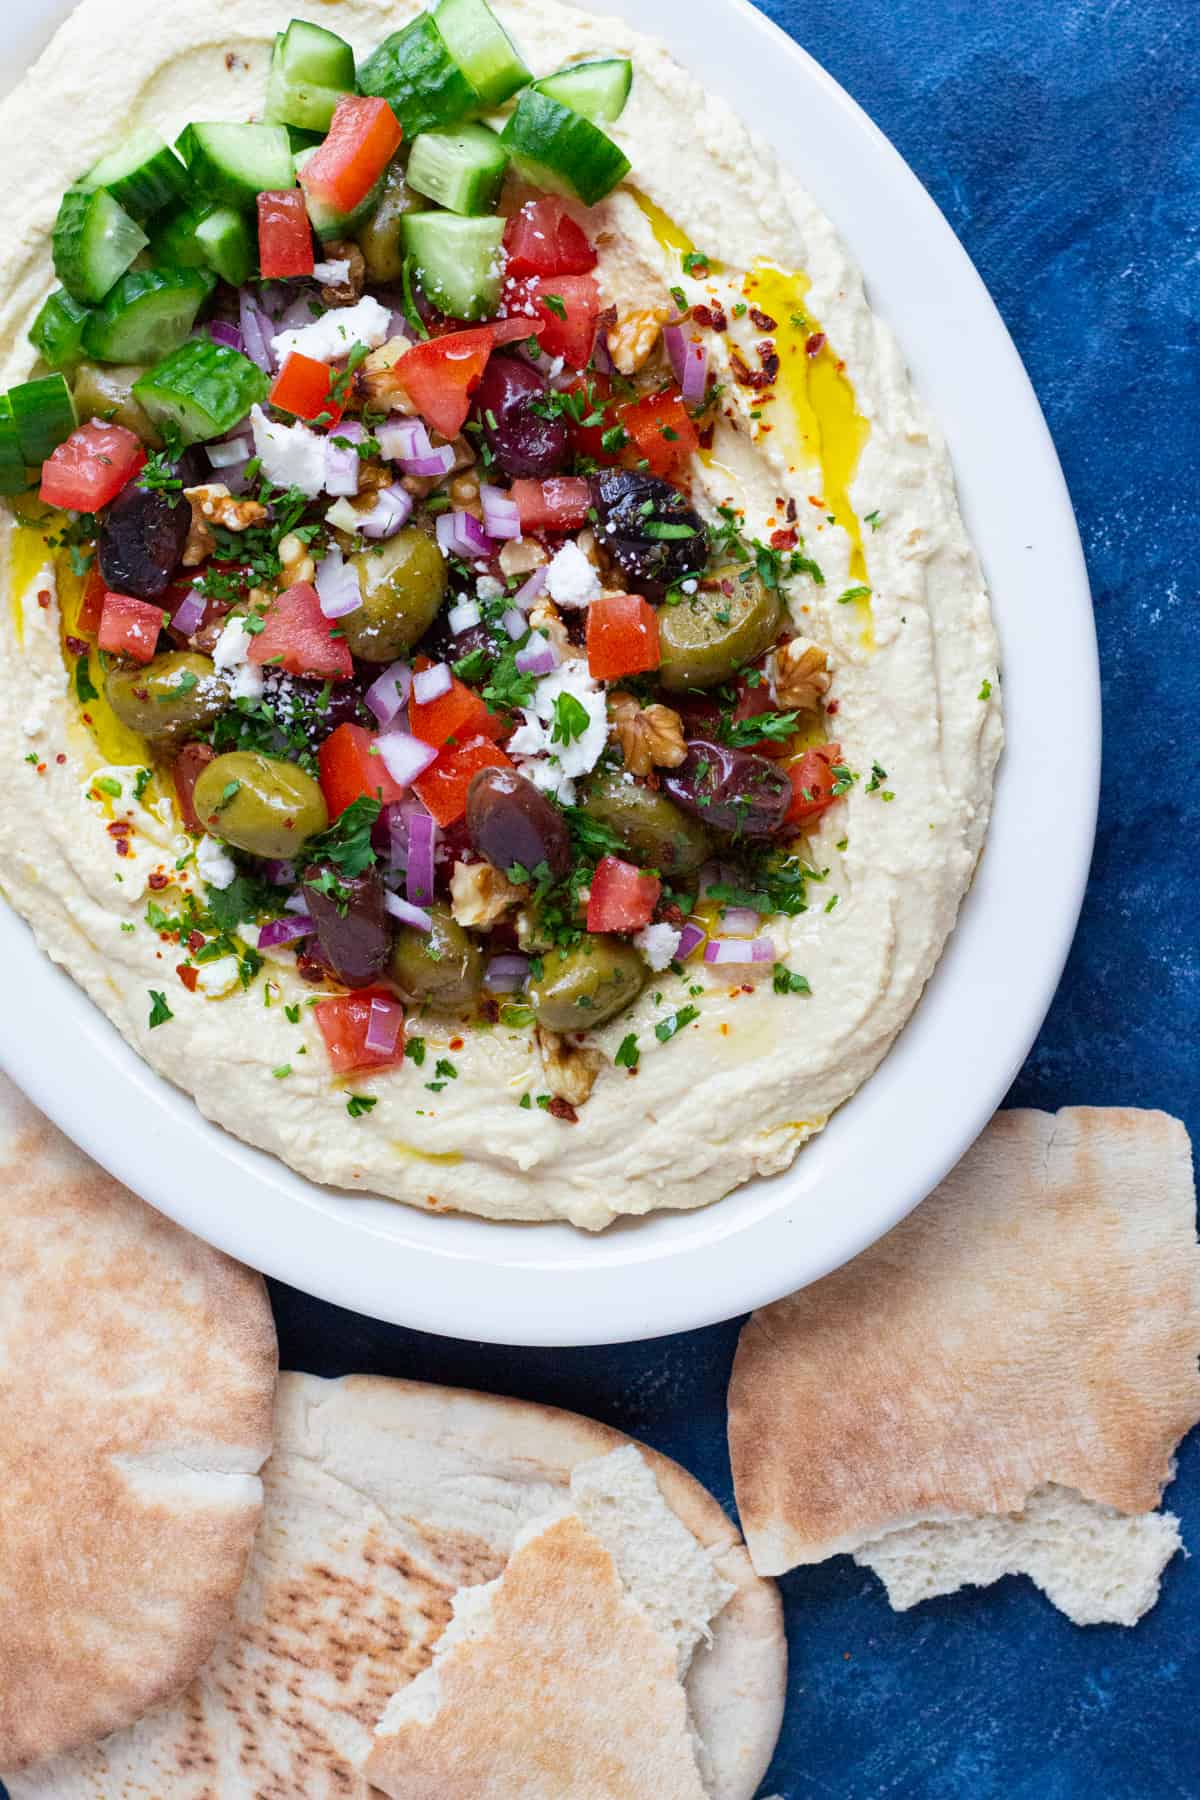 This loaded hummus recipe with all the fixings is ready in 15 minutes! Creamy hummus is topped with delicious toppings and served with pita!